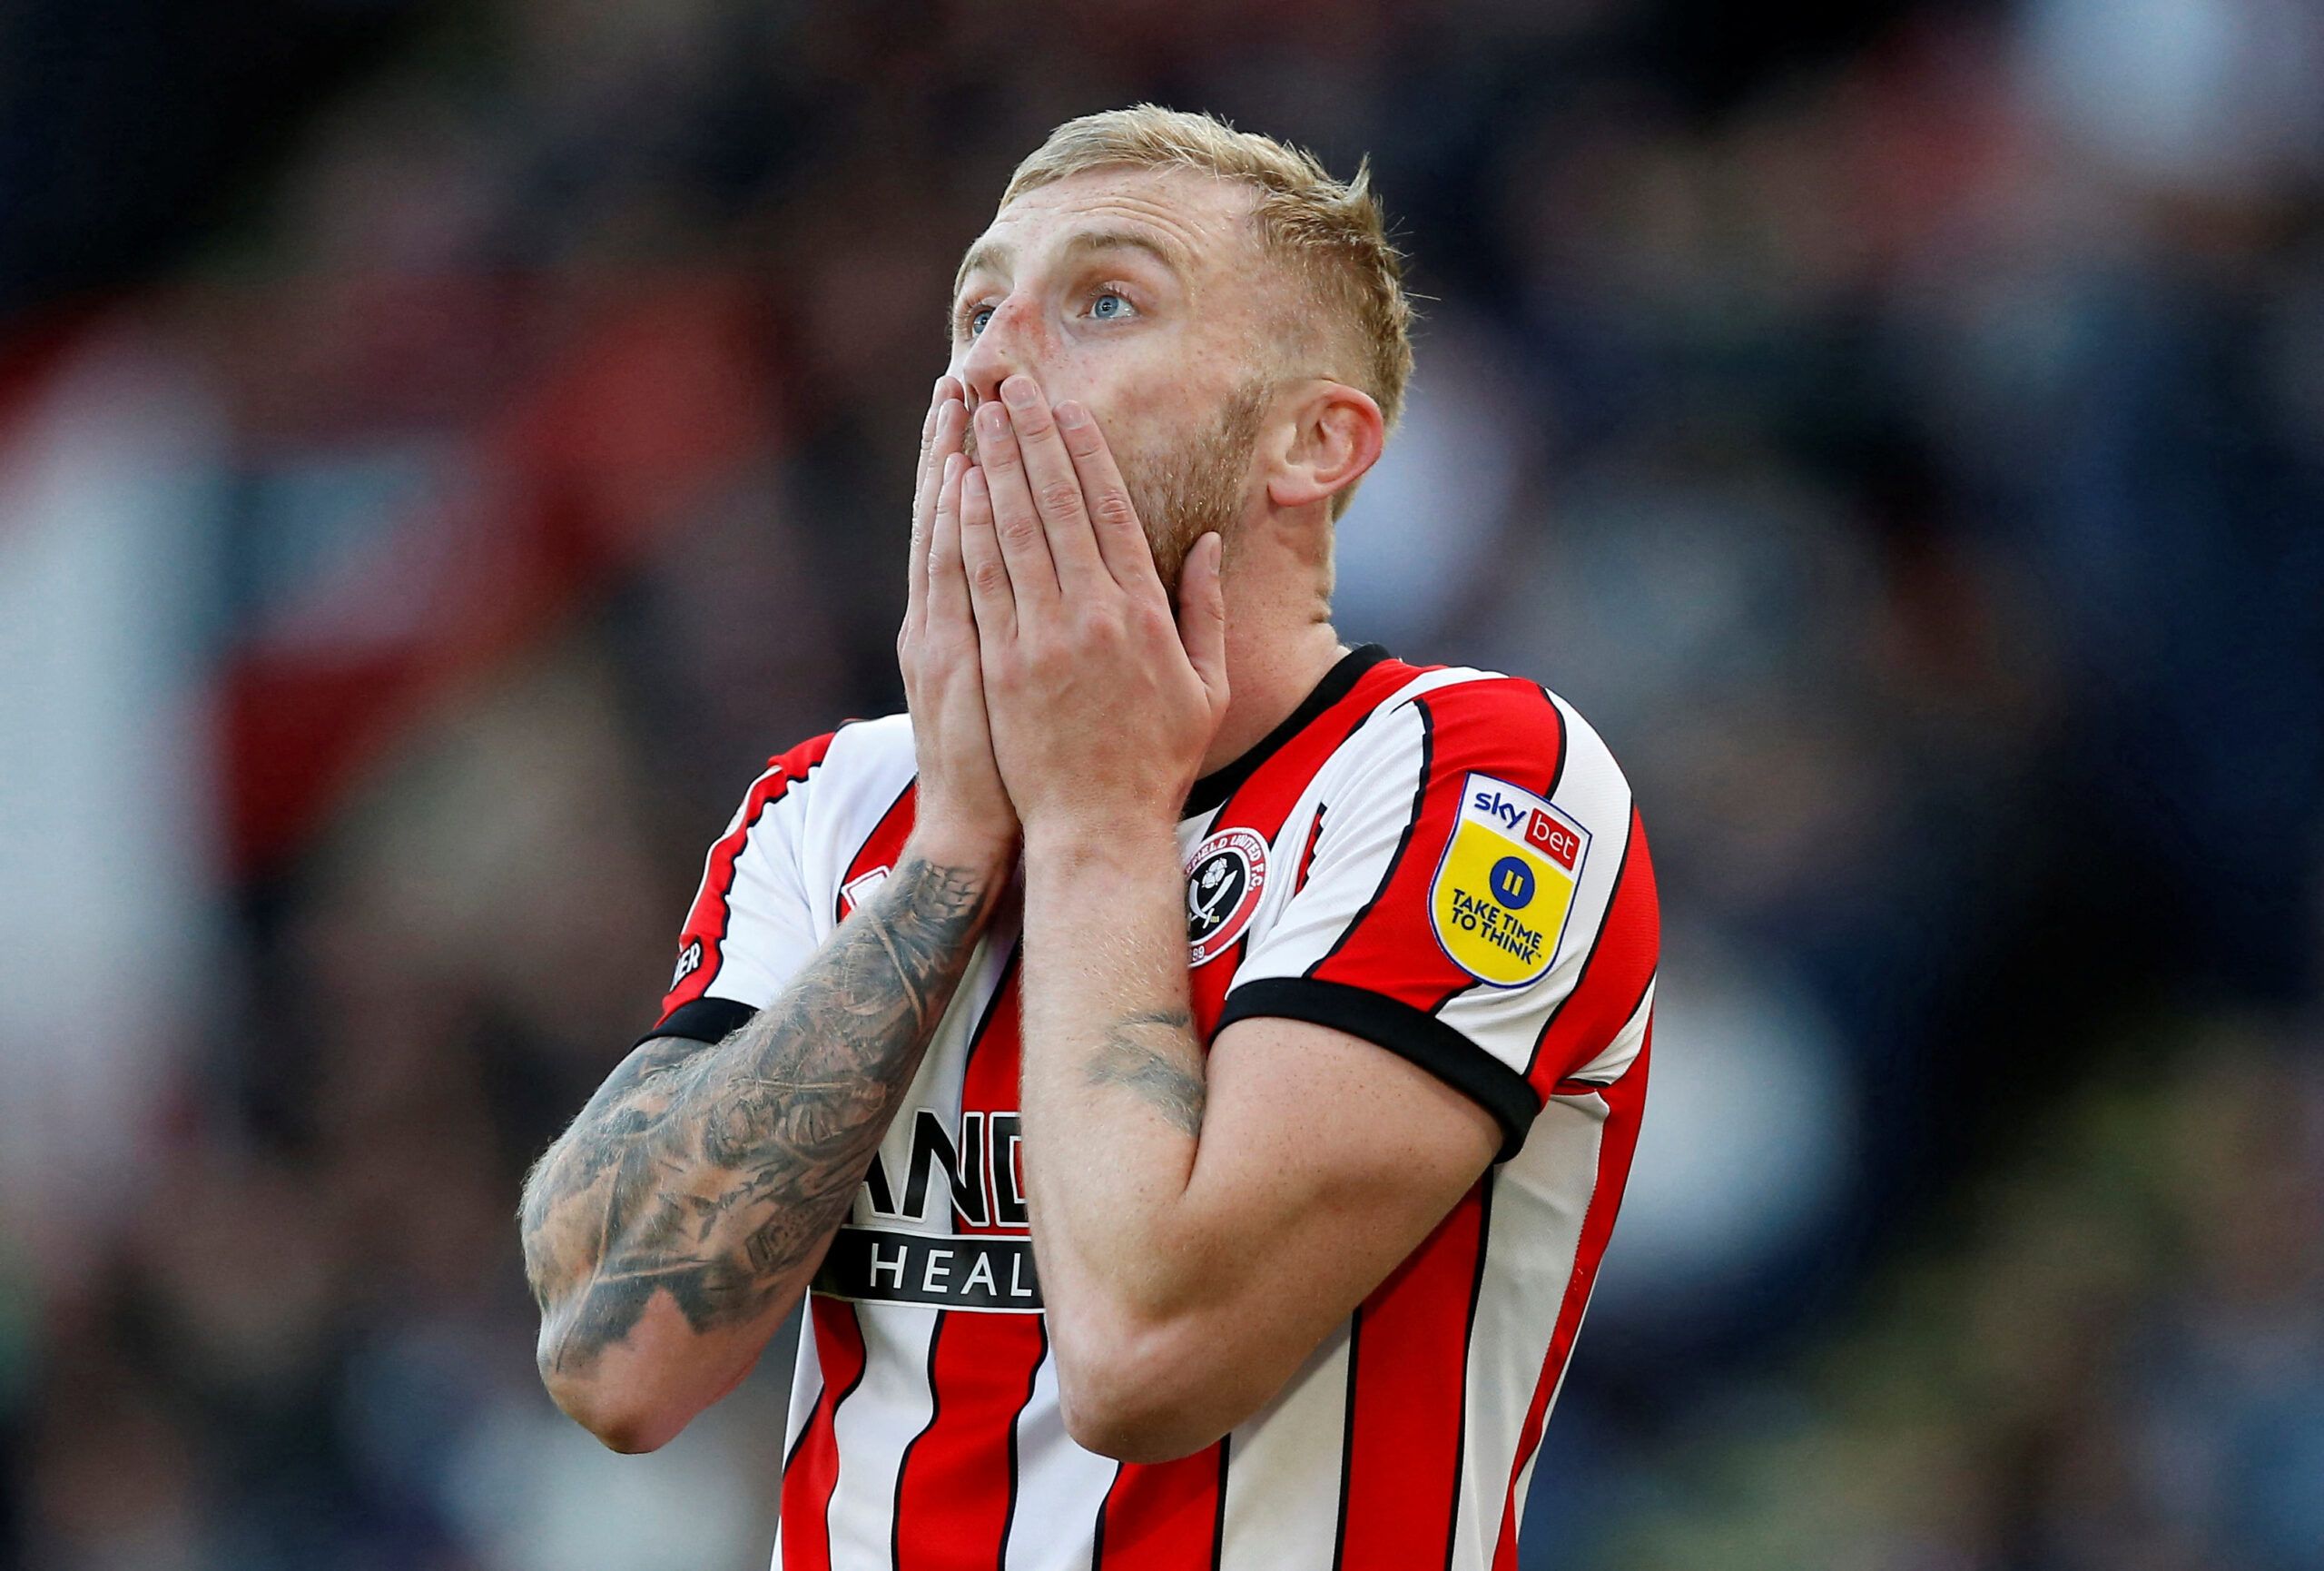 Soccer Football - Championship - Sheffield United v Blackpool - Bramall Lane, Sheffield, Britain - October 15, 2022 Sheffield United's Oli McBurnie reacts Action Images/Craig Brough  EDITORIAL USE ONLY. No use with unauthorized audio, video, data, fixture lists, club/league logos or 